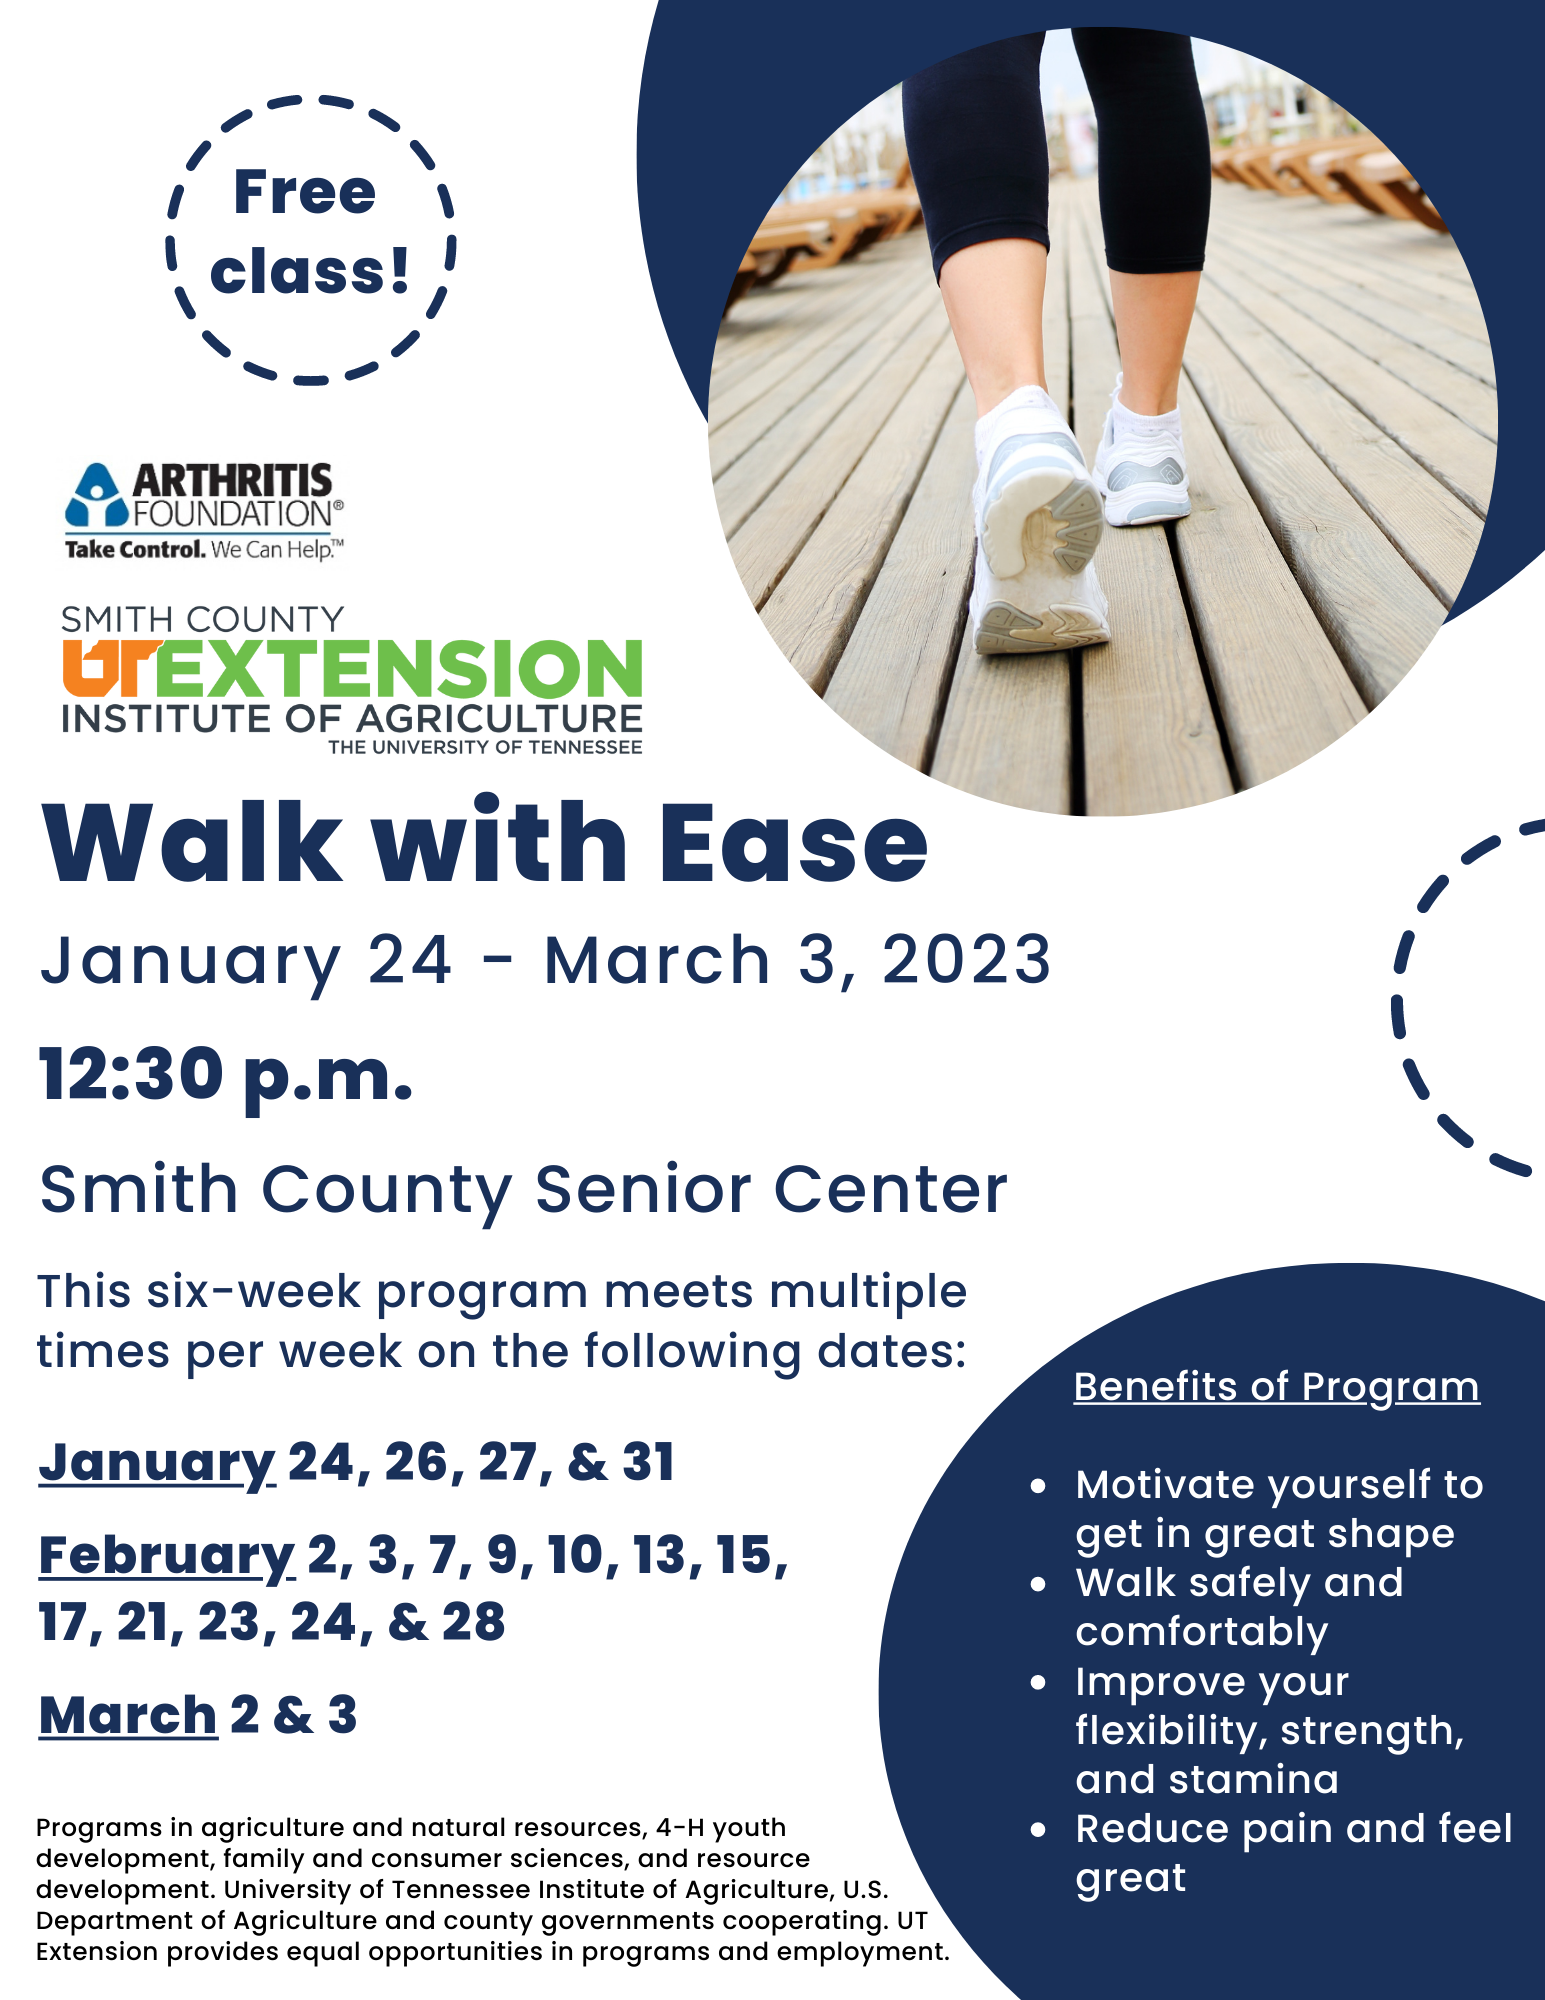 Walk with Ease | January 24 - March 3, 2023 | Smith County